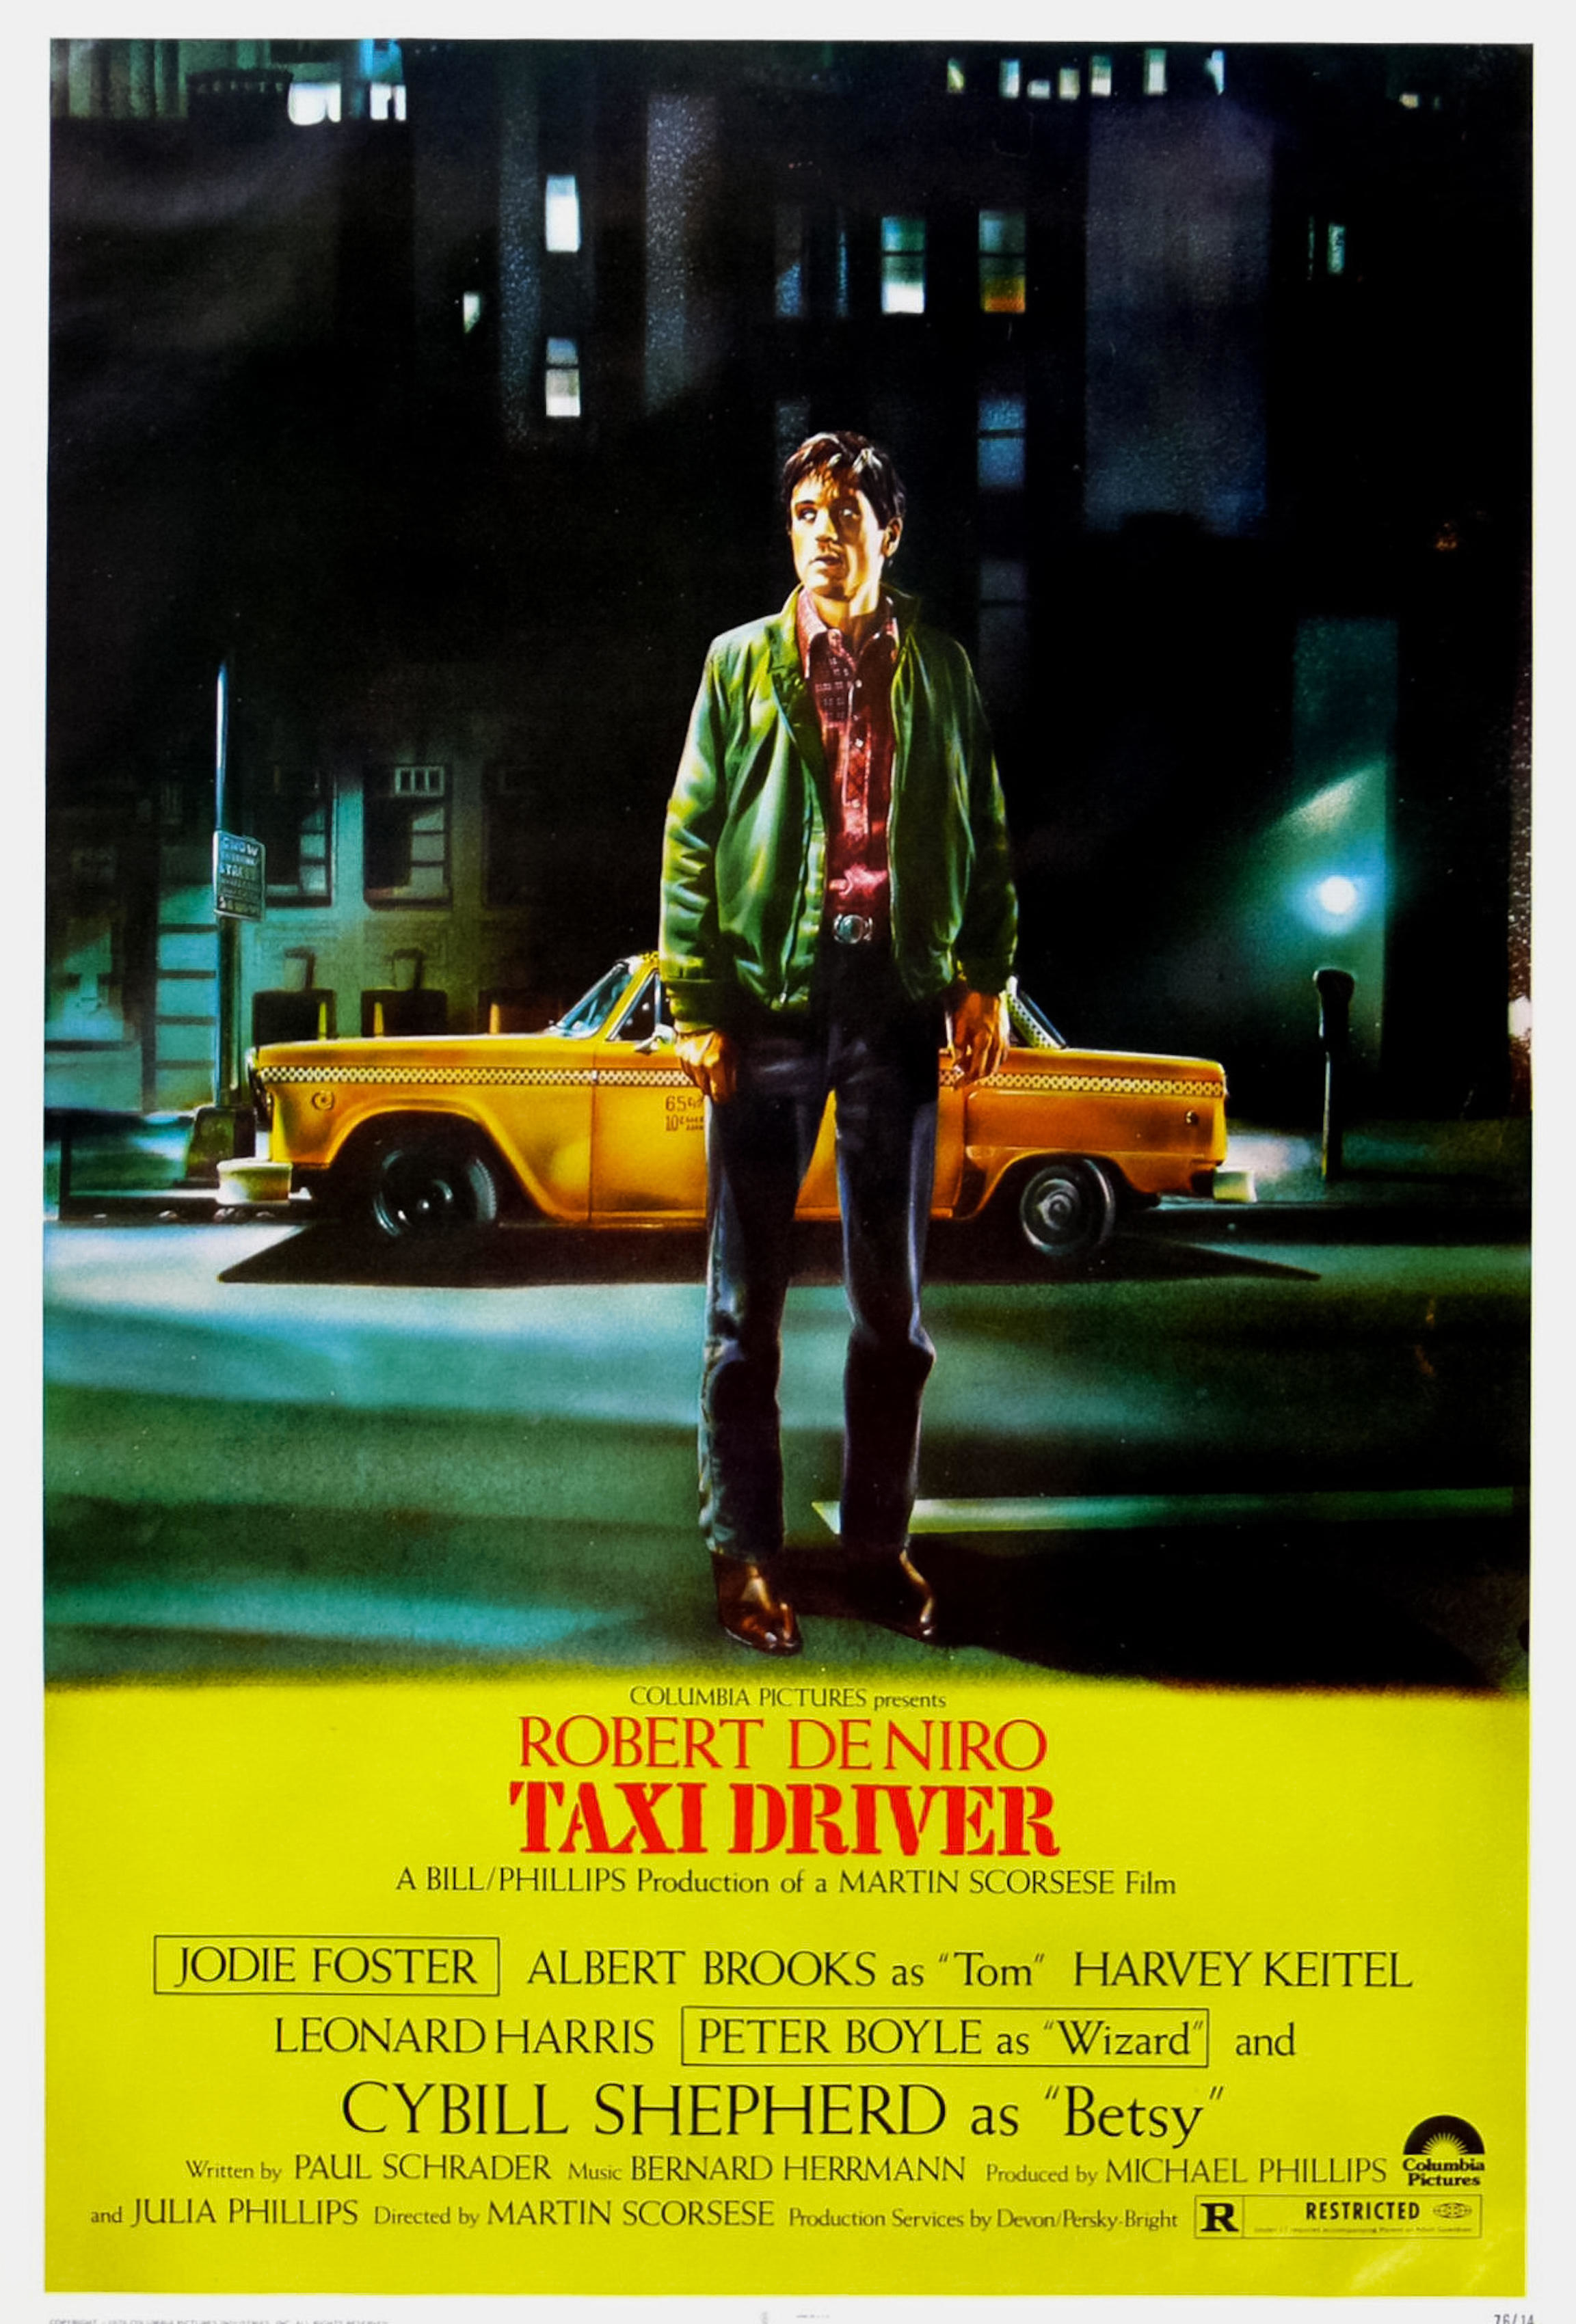 Publicity poster for &quot;The Taxi Driver&quot; with Robert De Niro as Travis Bickle